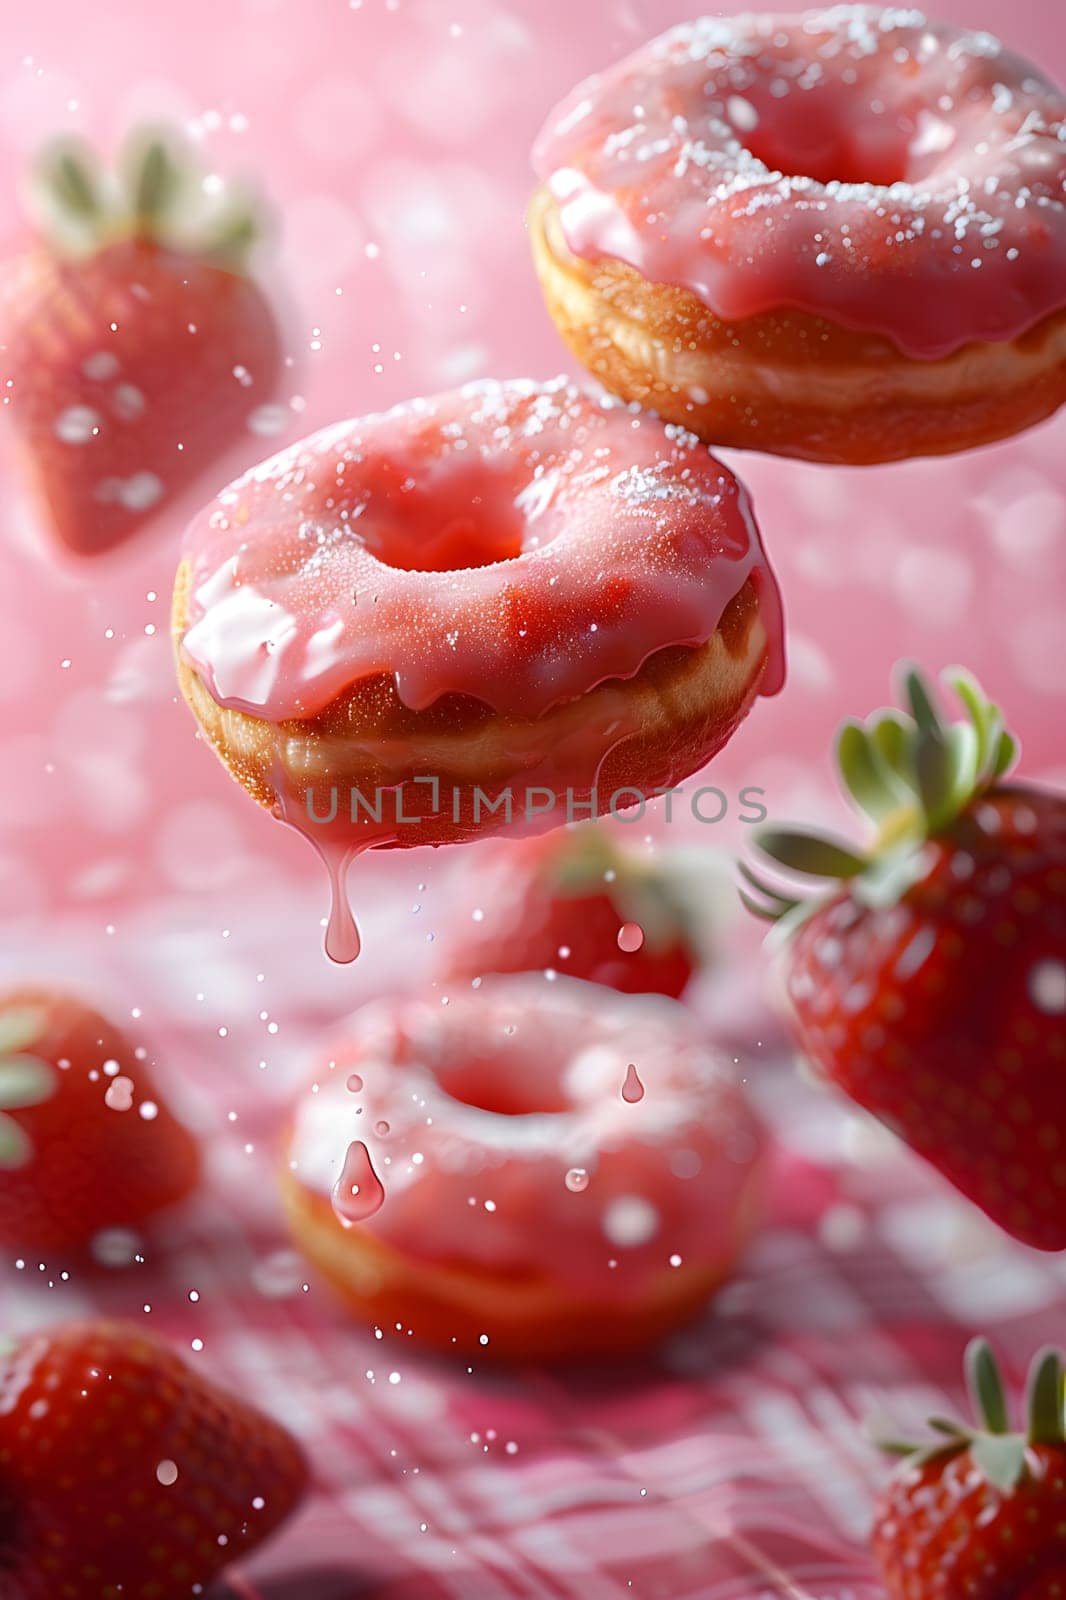 A colorful display of strawberries, donuts, and other fruits floating in the air against a pink backdrop. The mix of natural foods, berries, and sweet treats creates a vibrant image